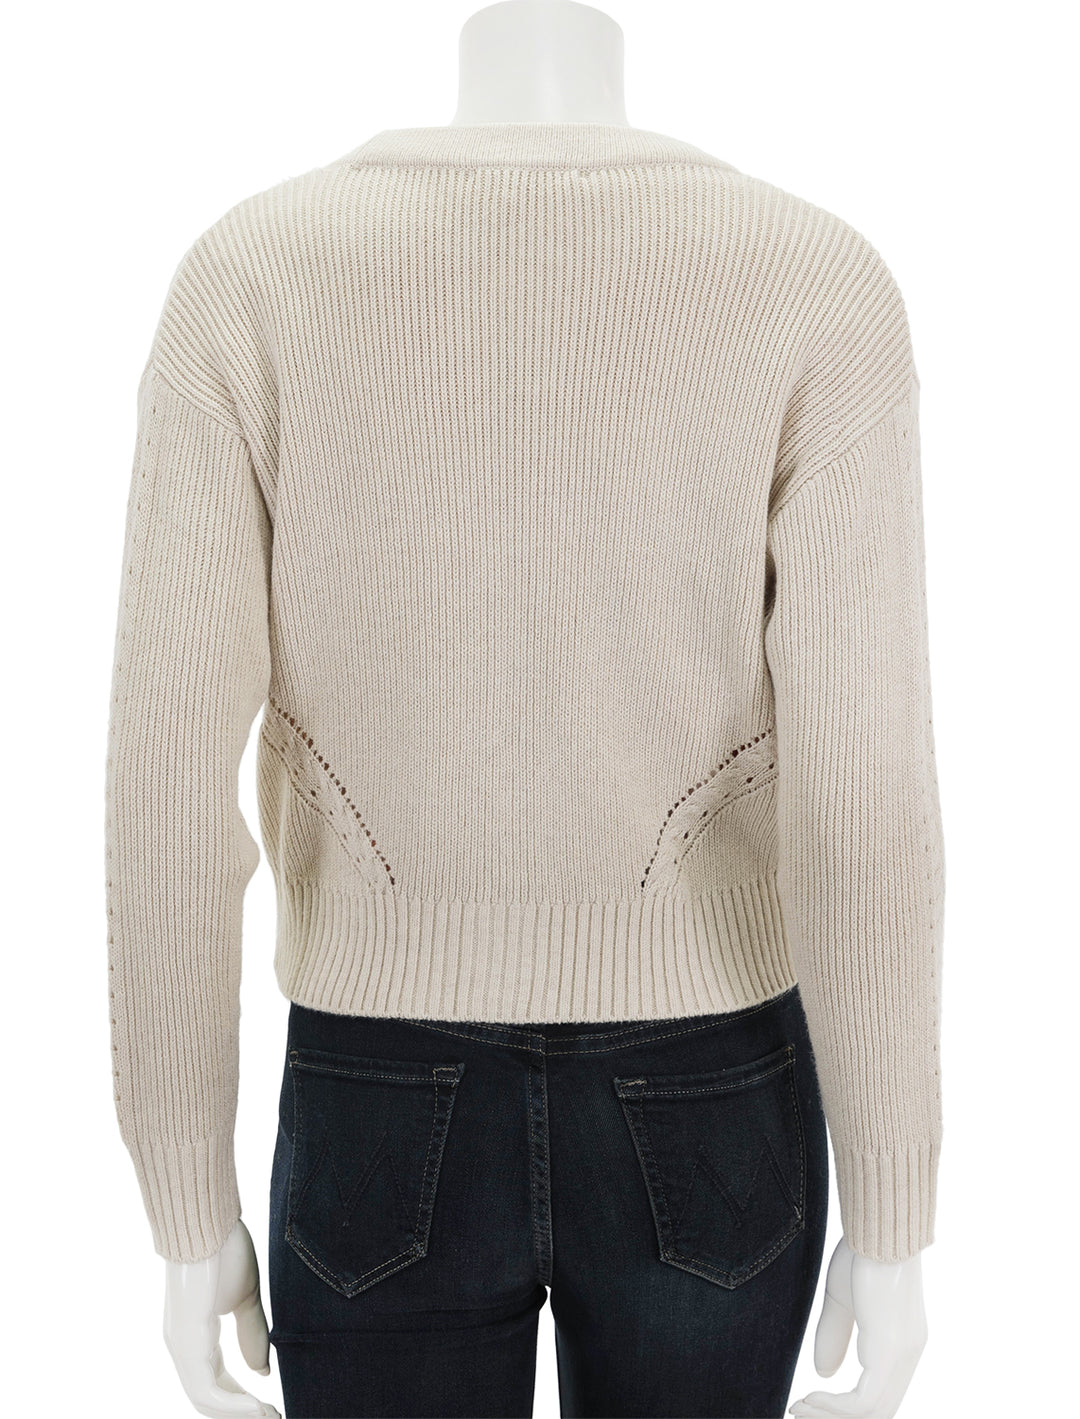 Back view of Marine Layer's robin crop cardigan in oatmeal.